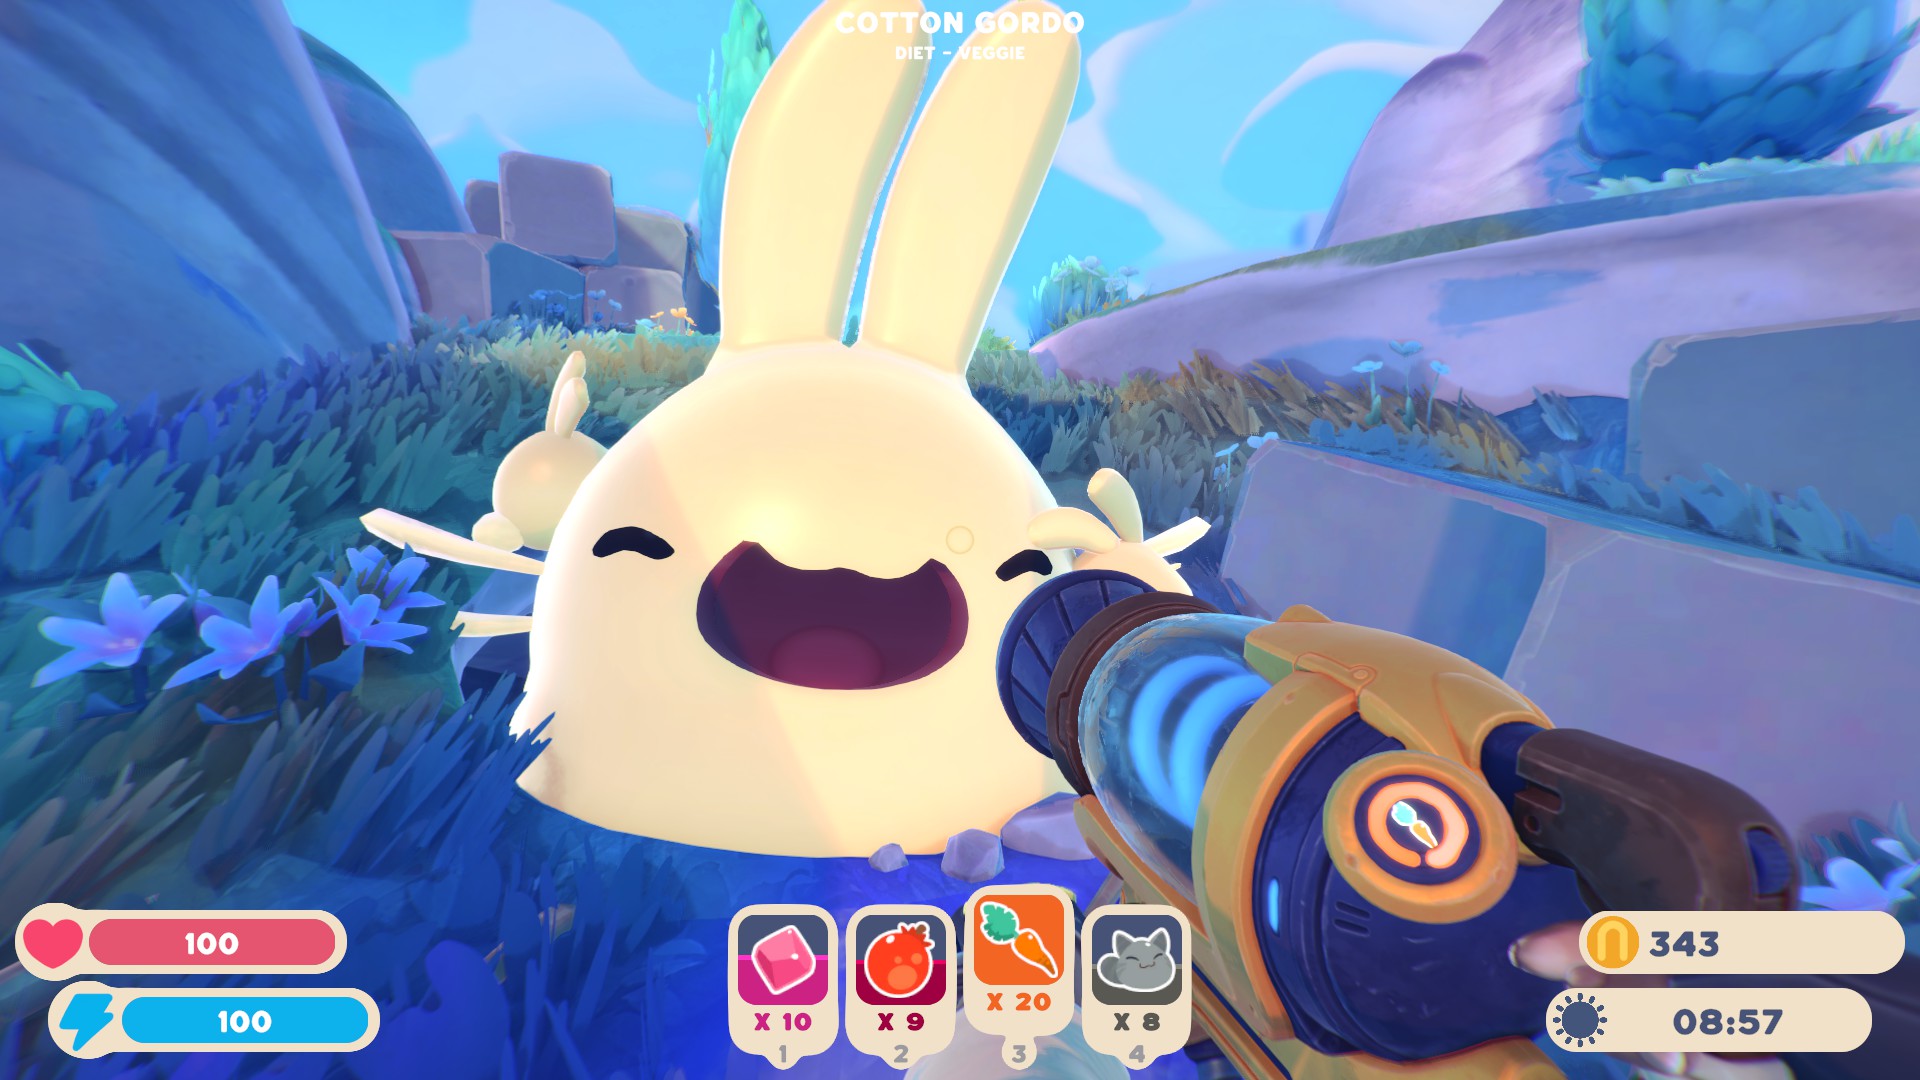 Slime Rancher 2 - All Species Full Guide - Cotton Slime - 8DEFBFC